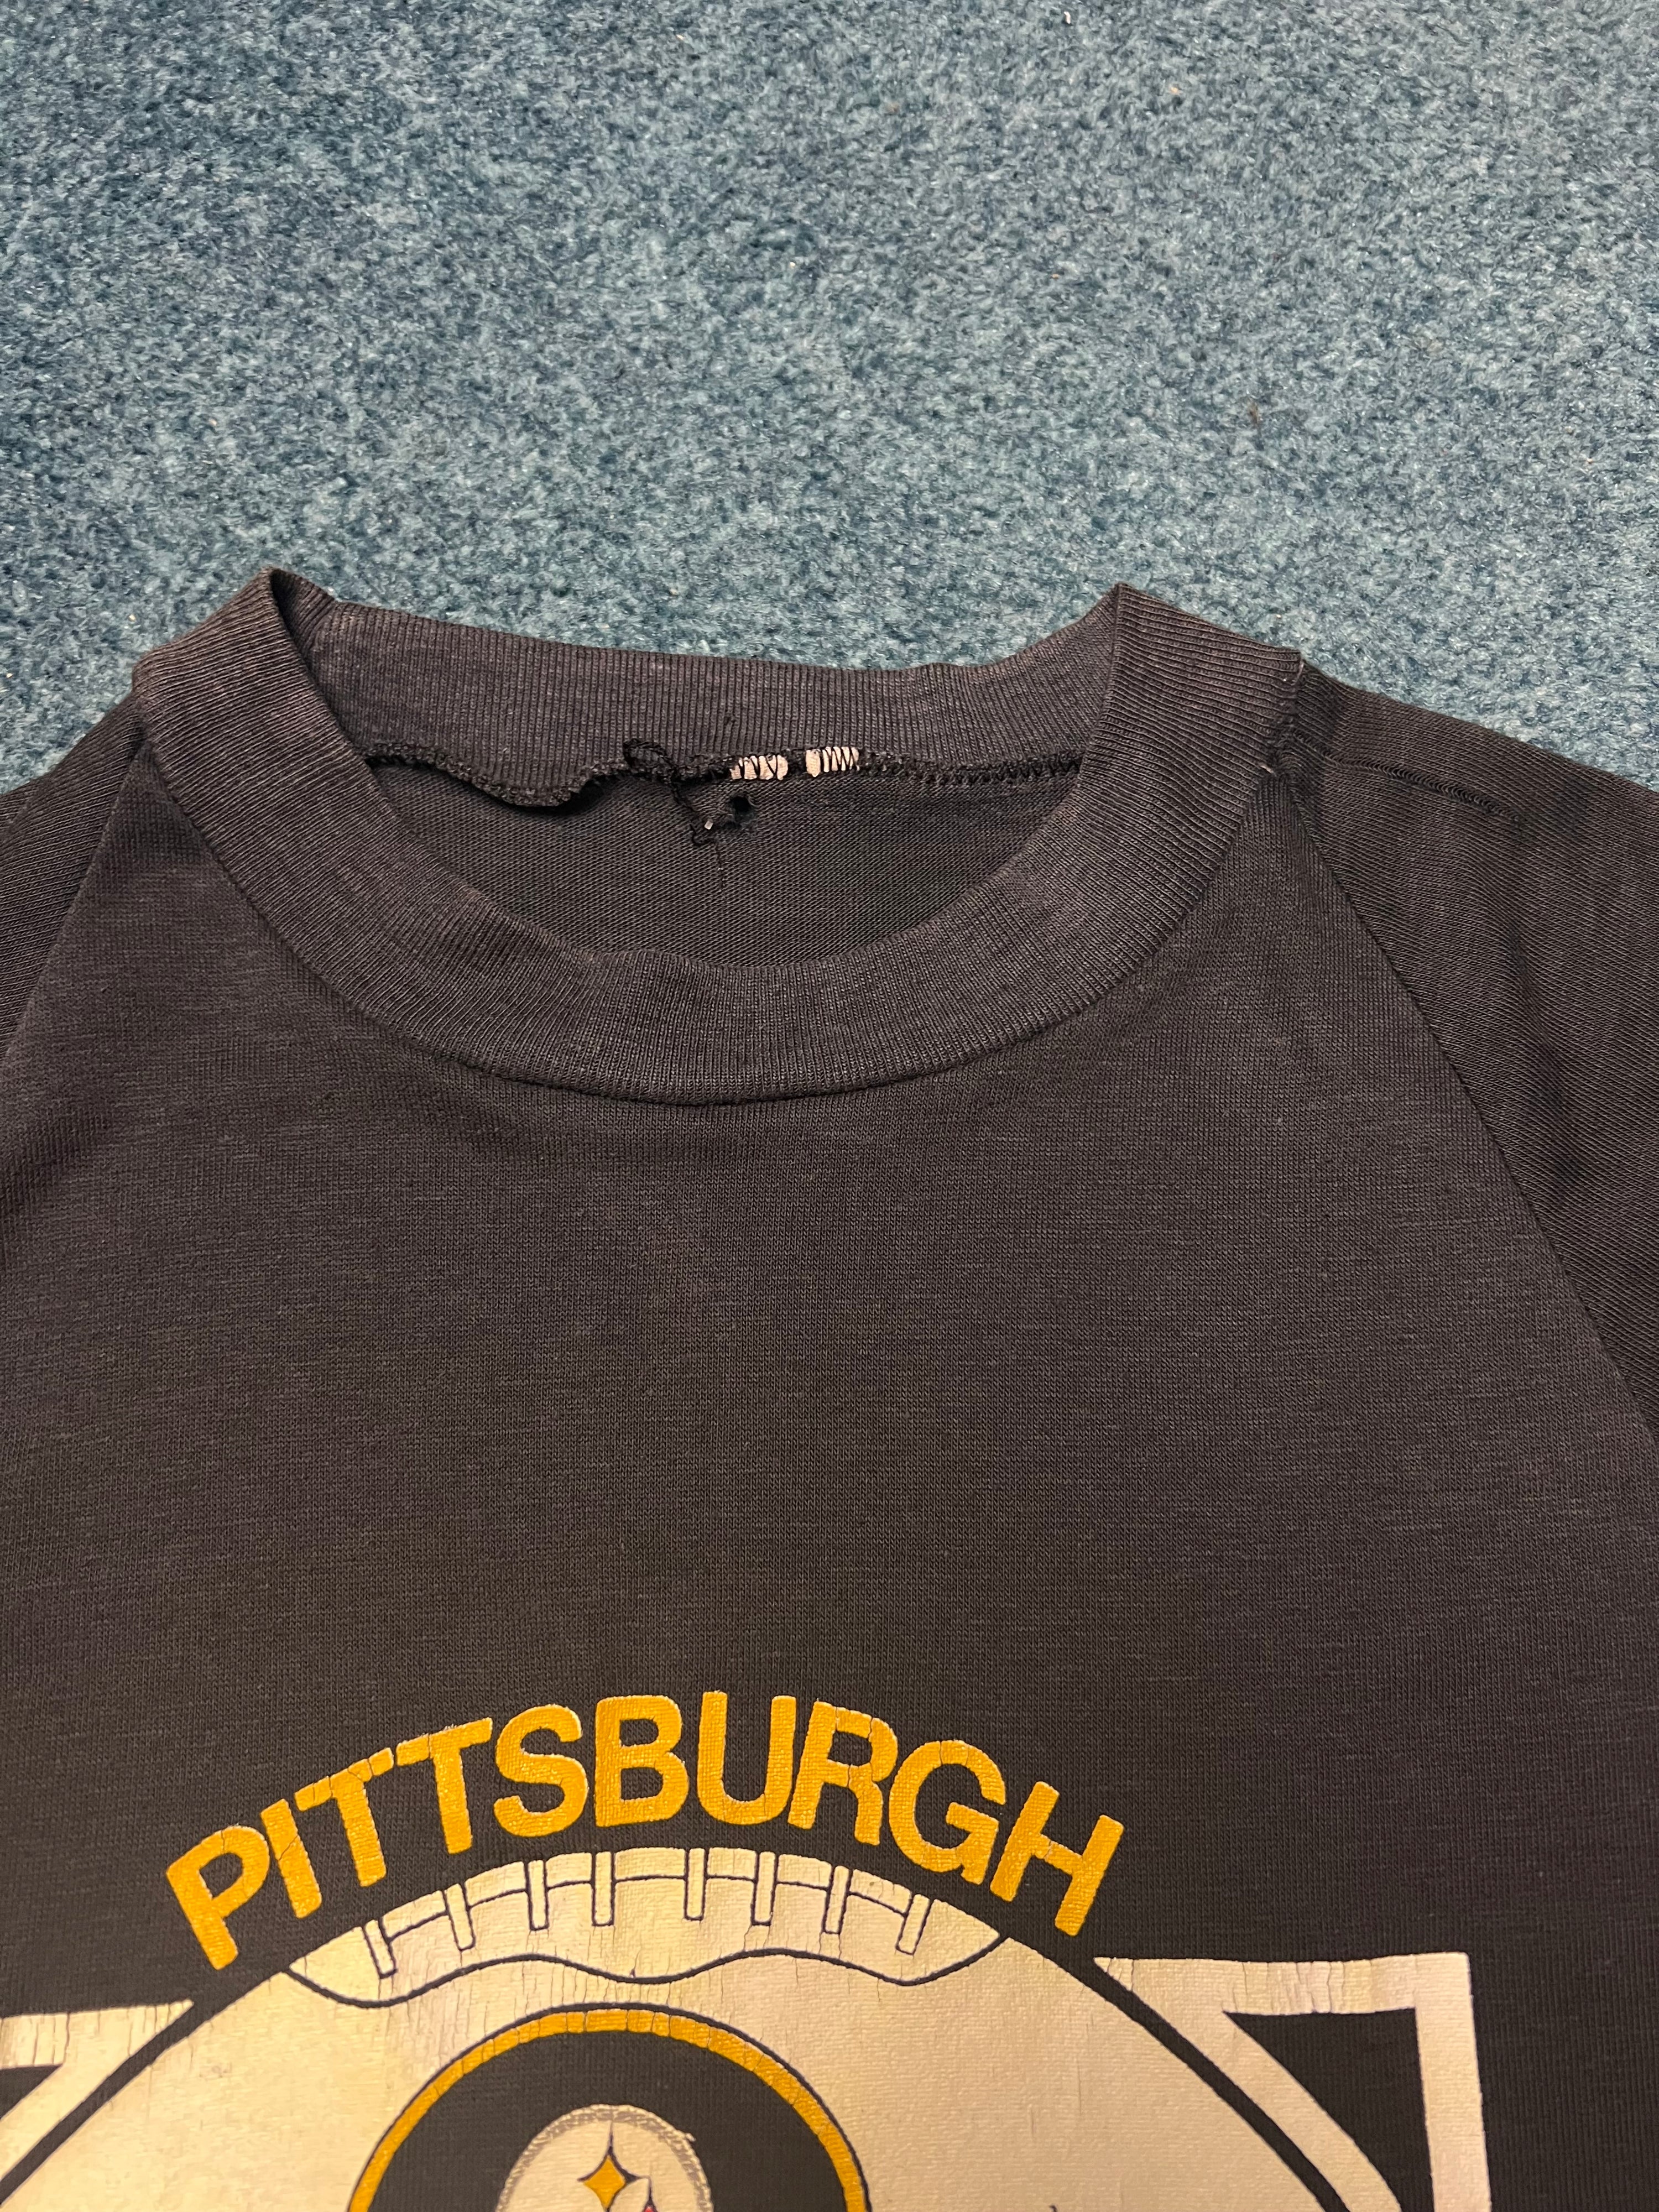 Vintage 70s Pittburgh Steelers NFL Football Single Stitched T-Shirt (S)